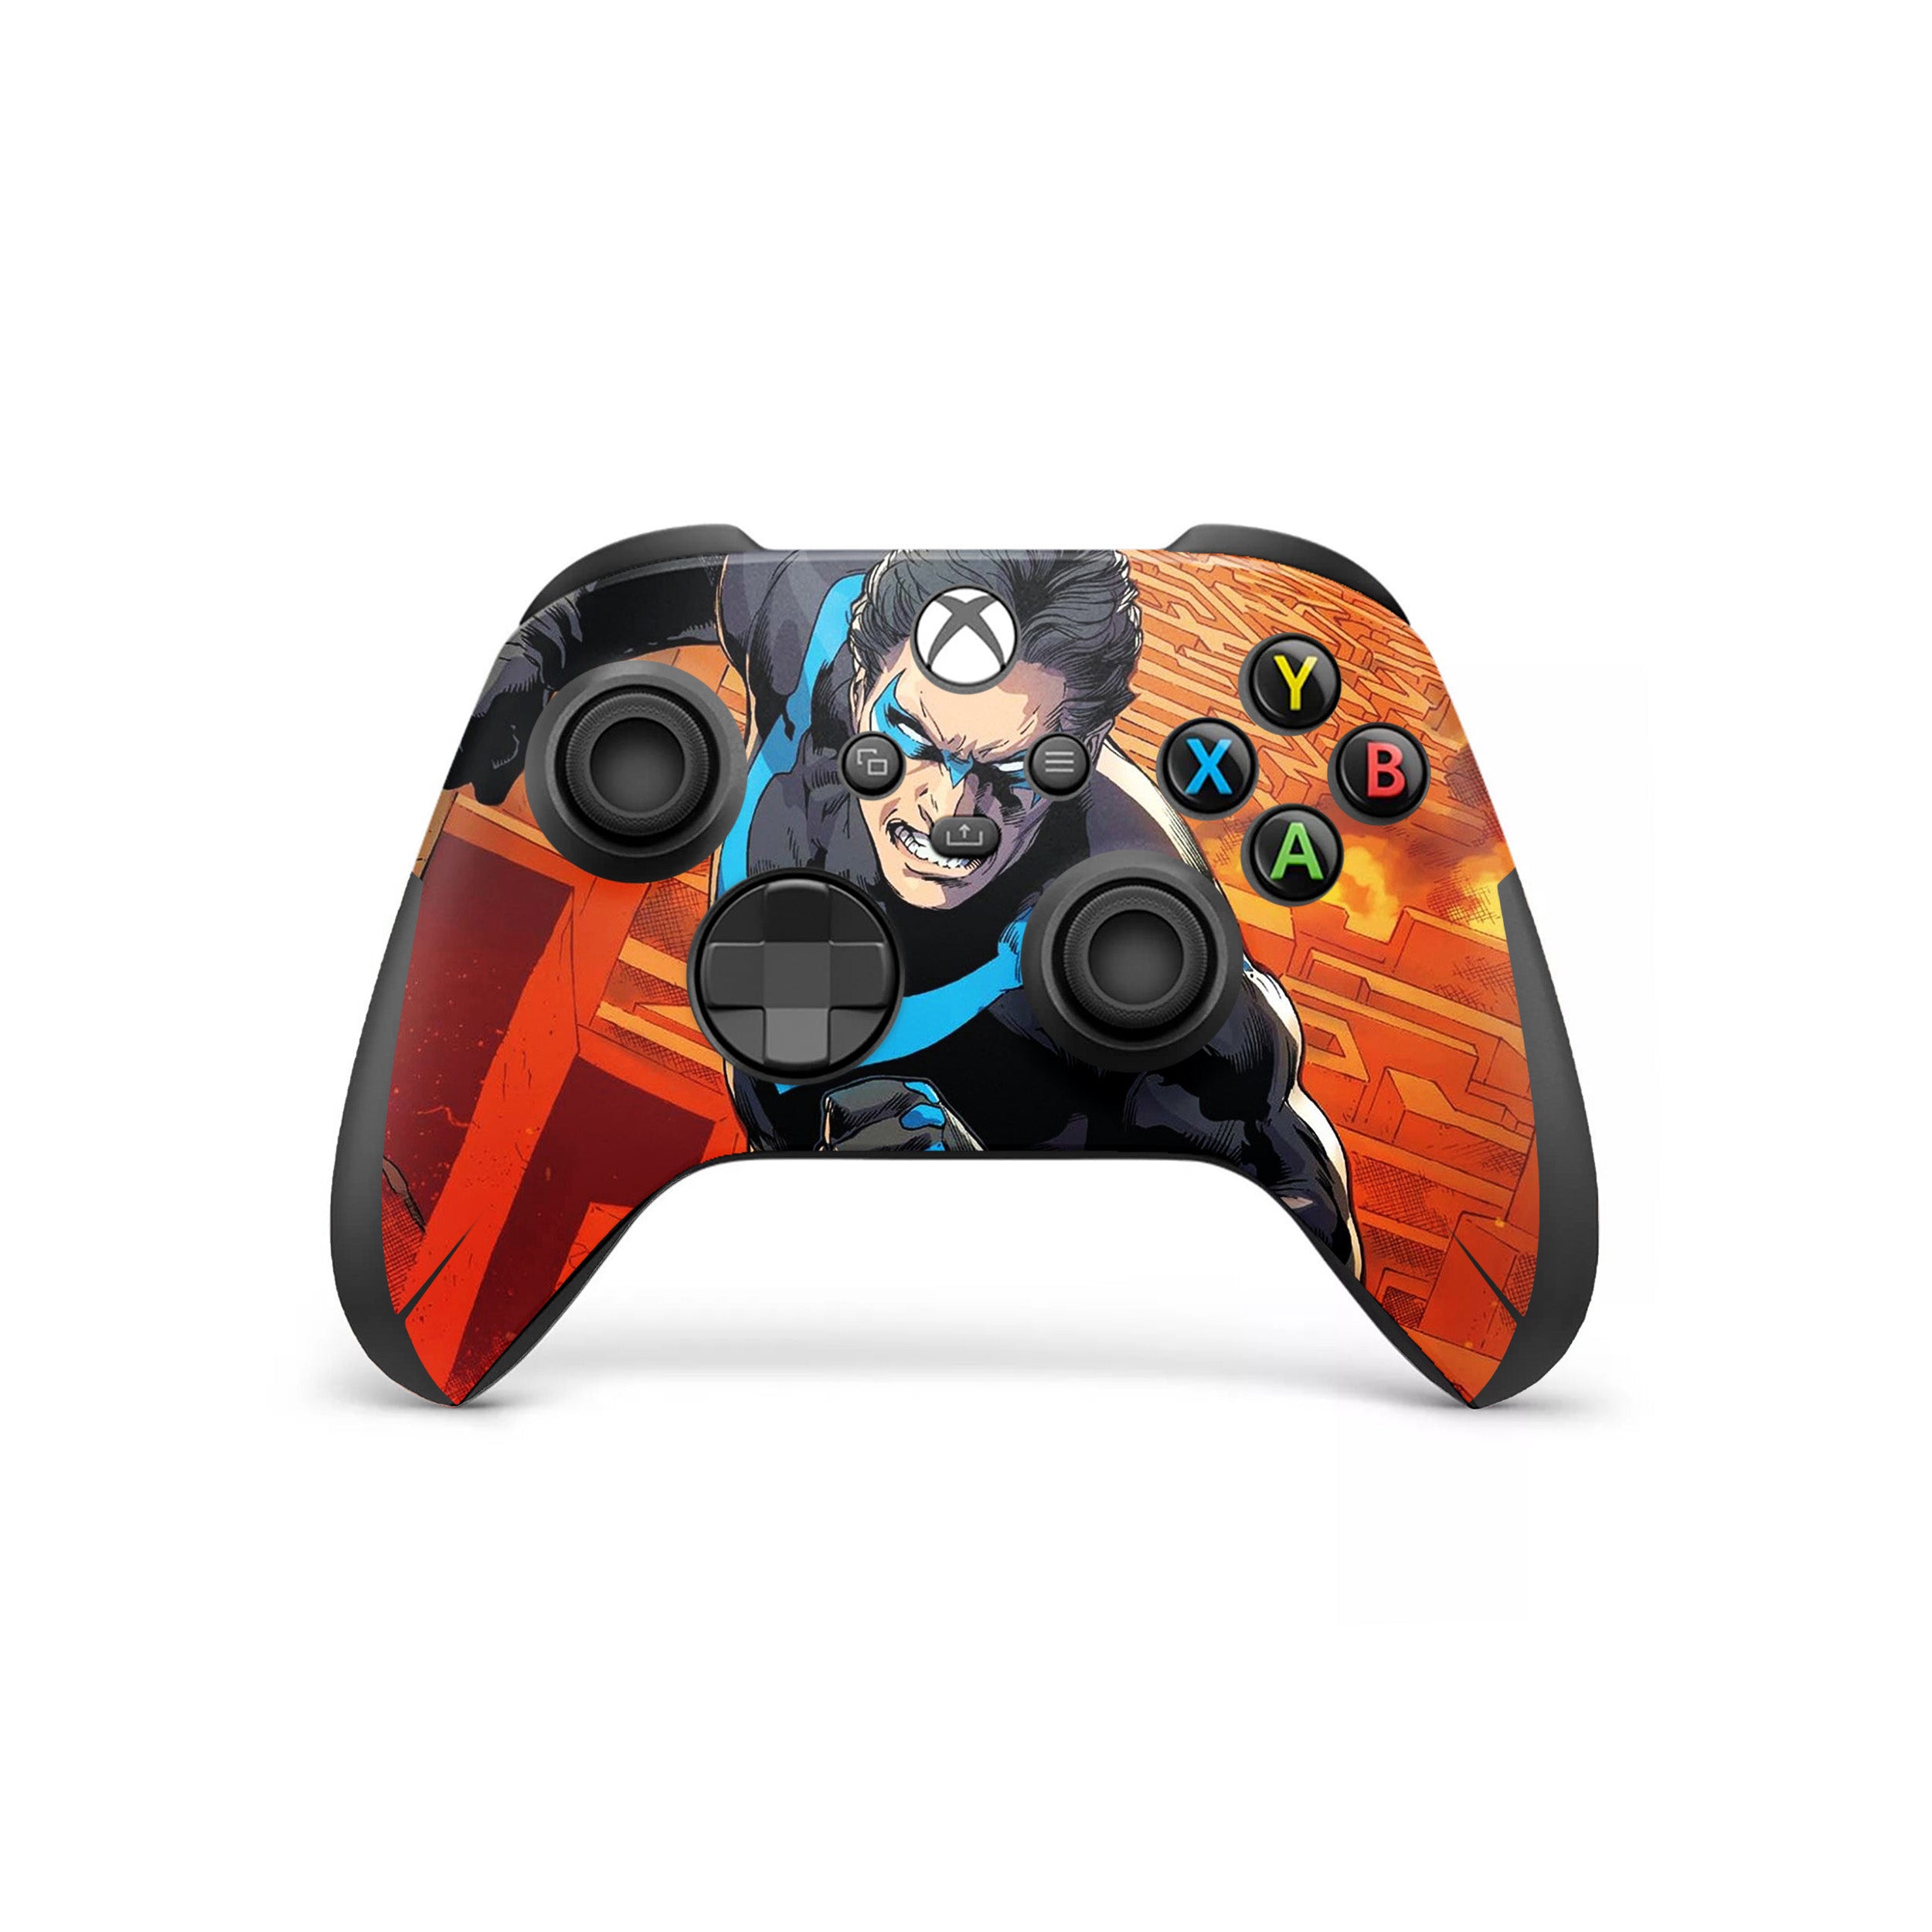 A video game skin featuring a DC Comics Nightwing design for the Xbox Wireless Controller.